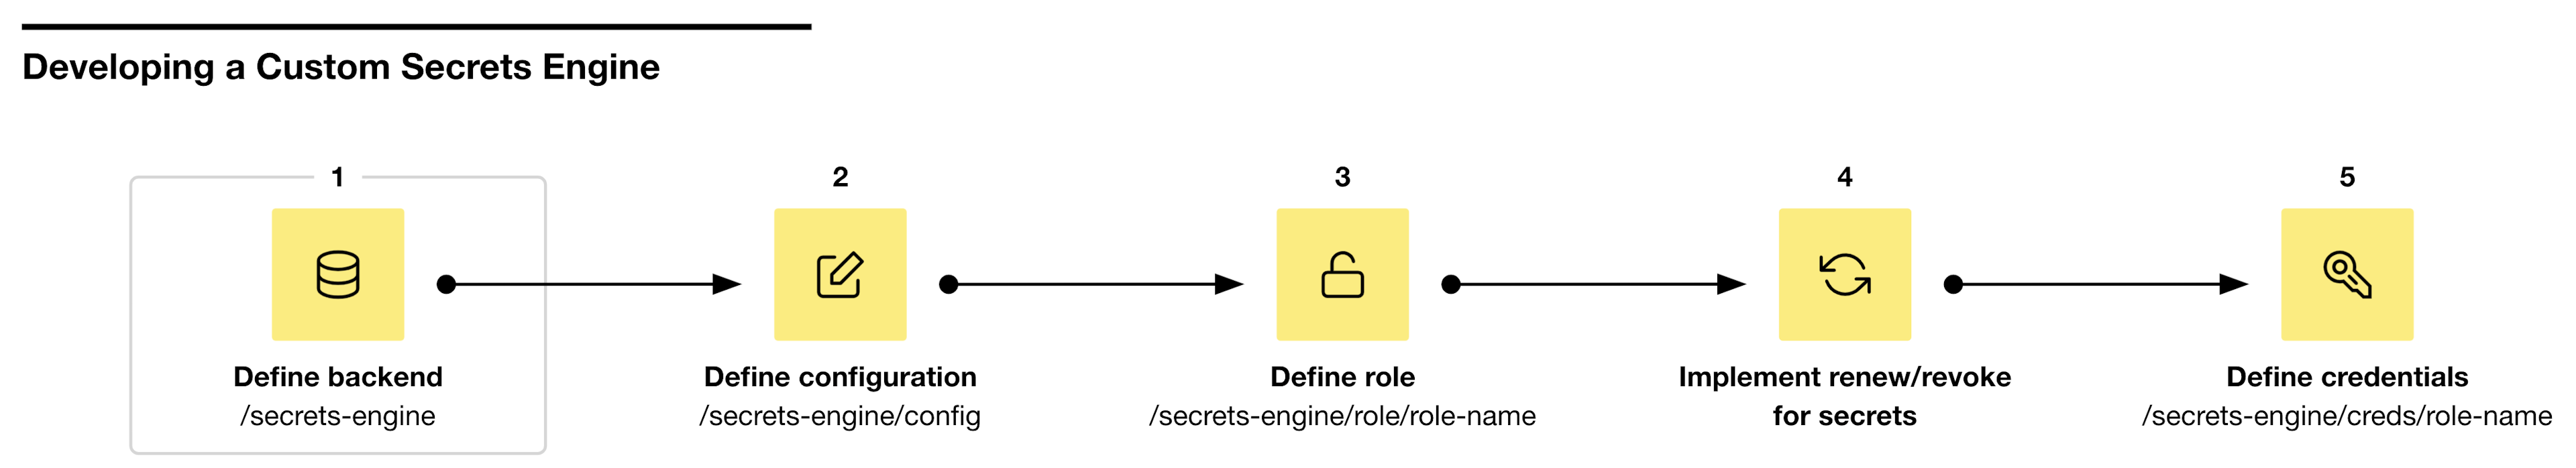 Step 1 defines a backend at /secrets-engine